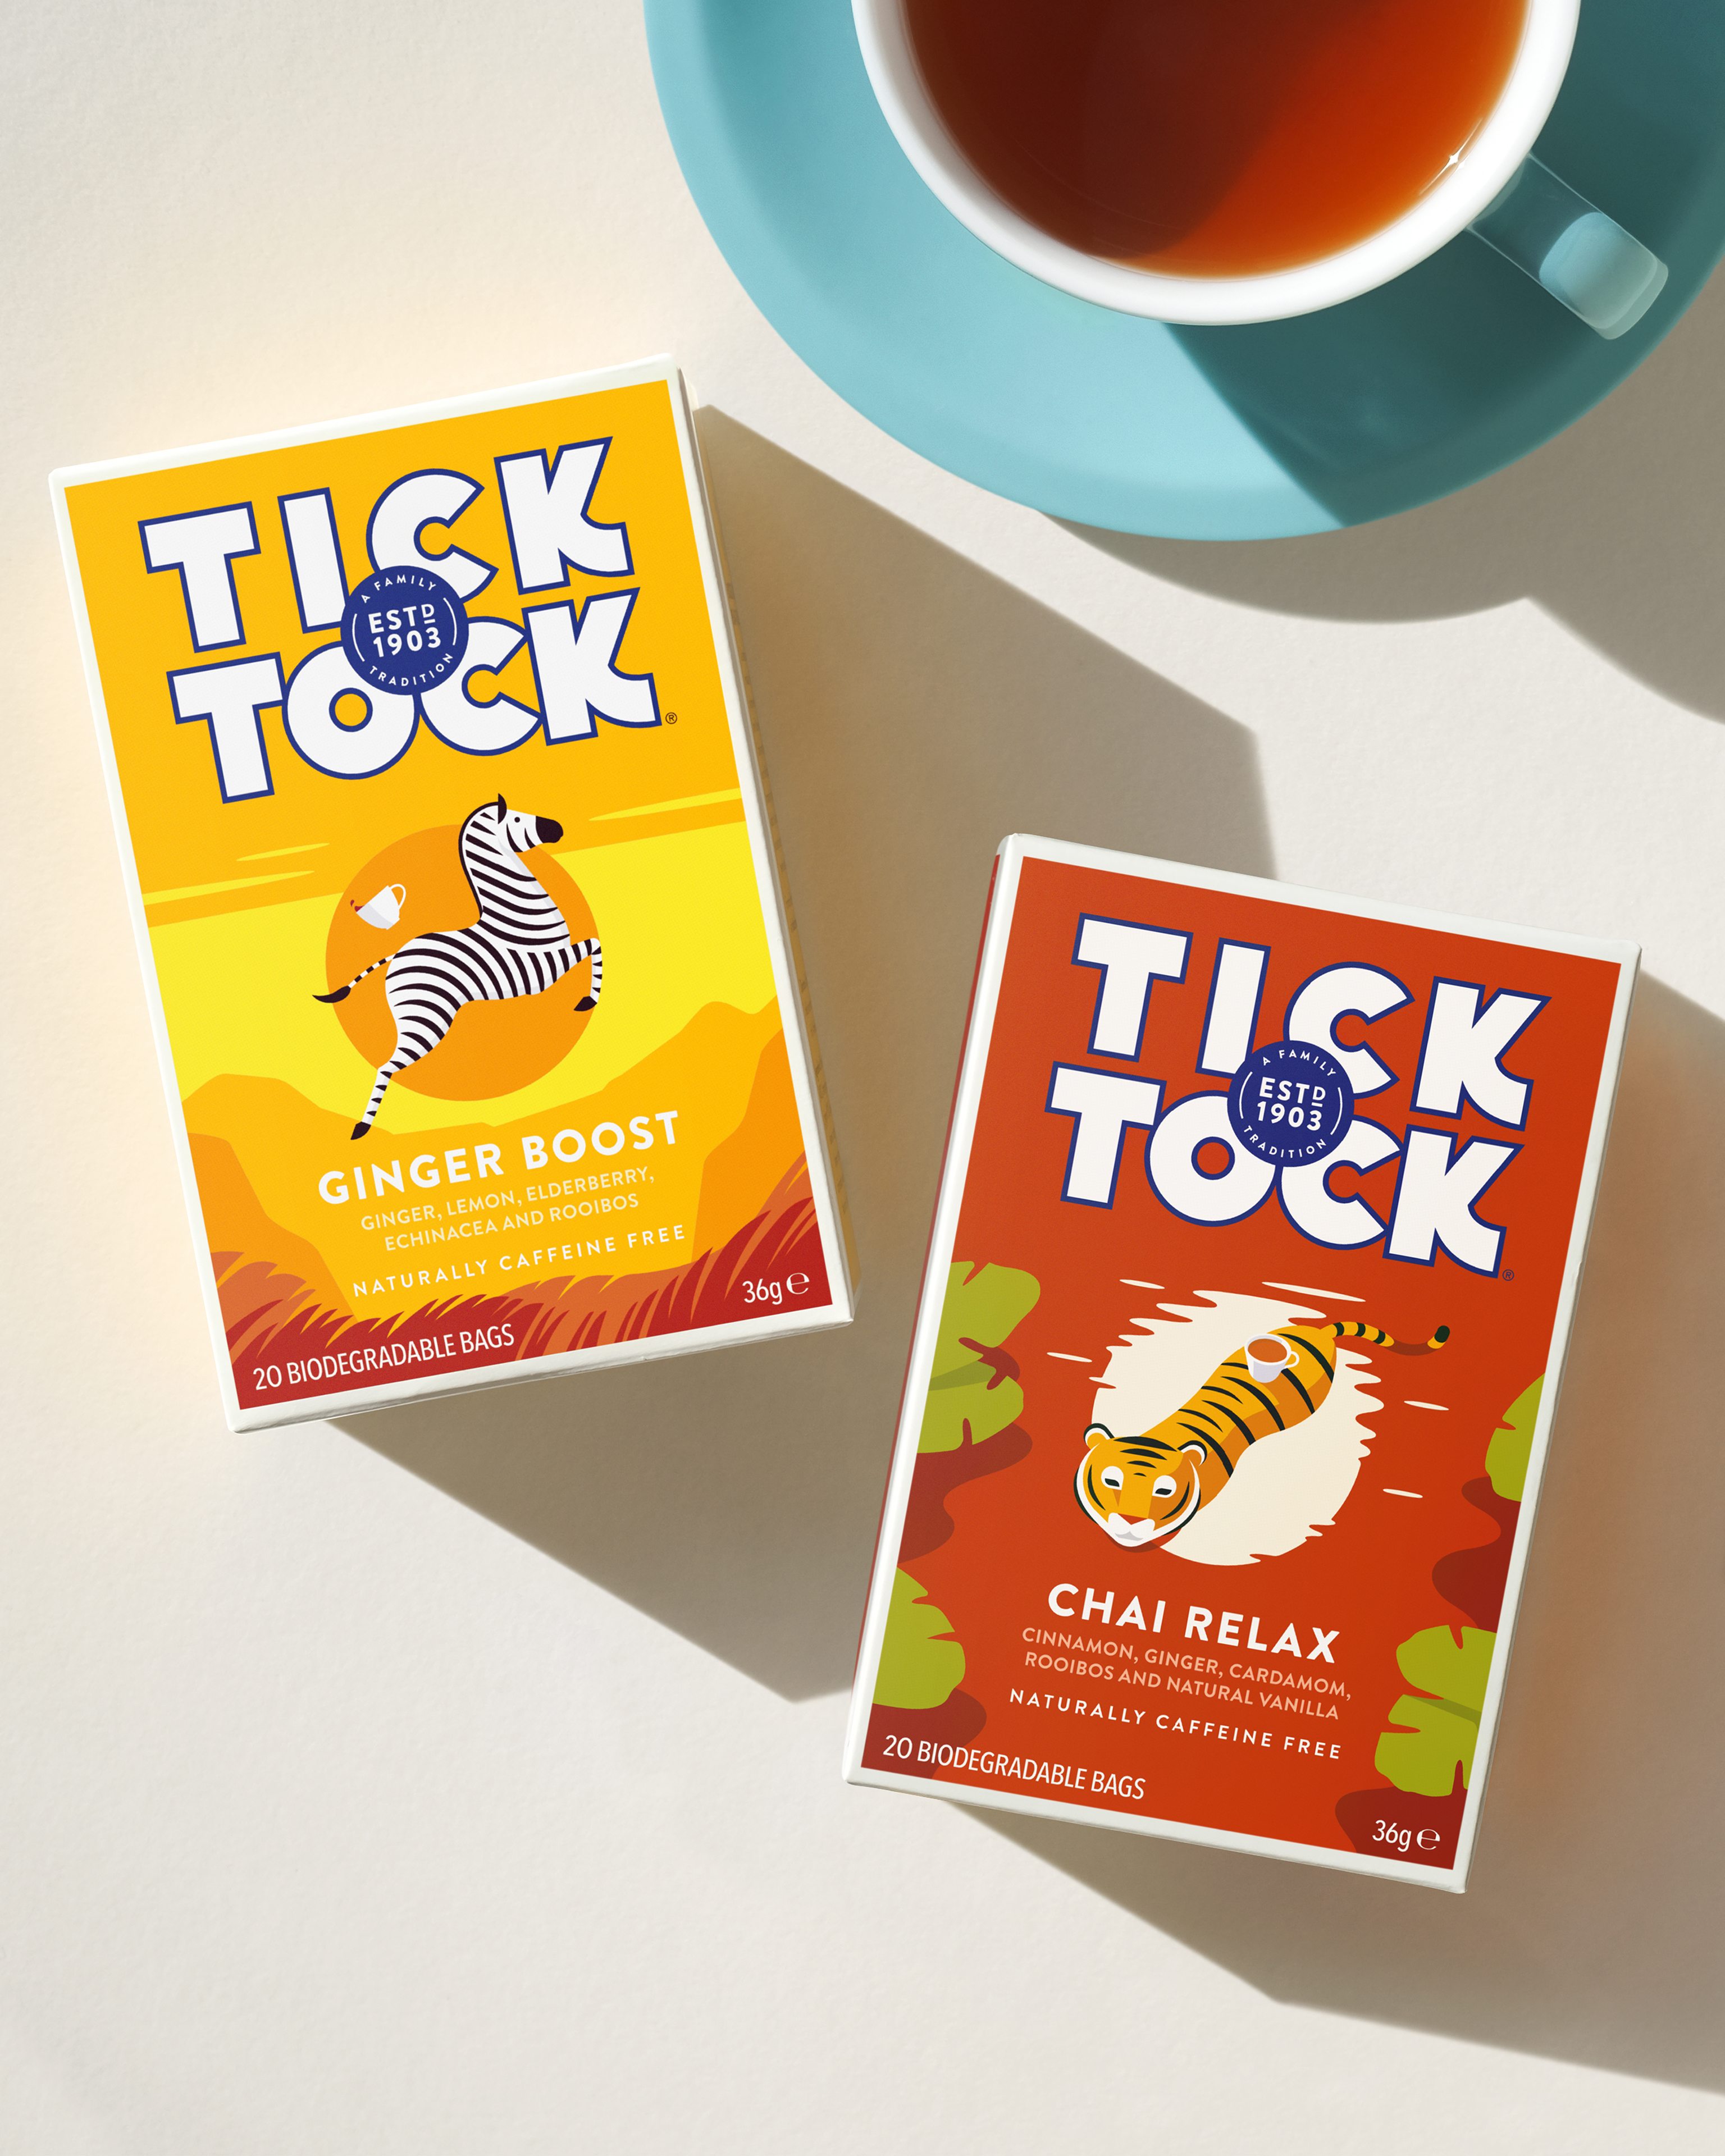 Adding Character and Joy with Tick Tock Wellbeing Tea